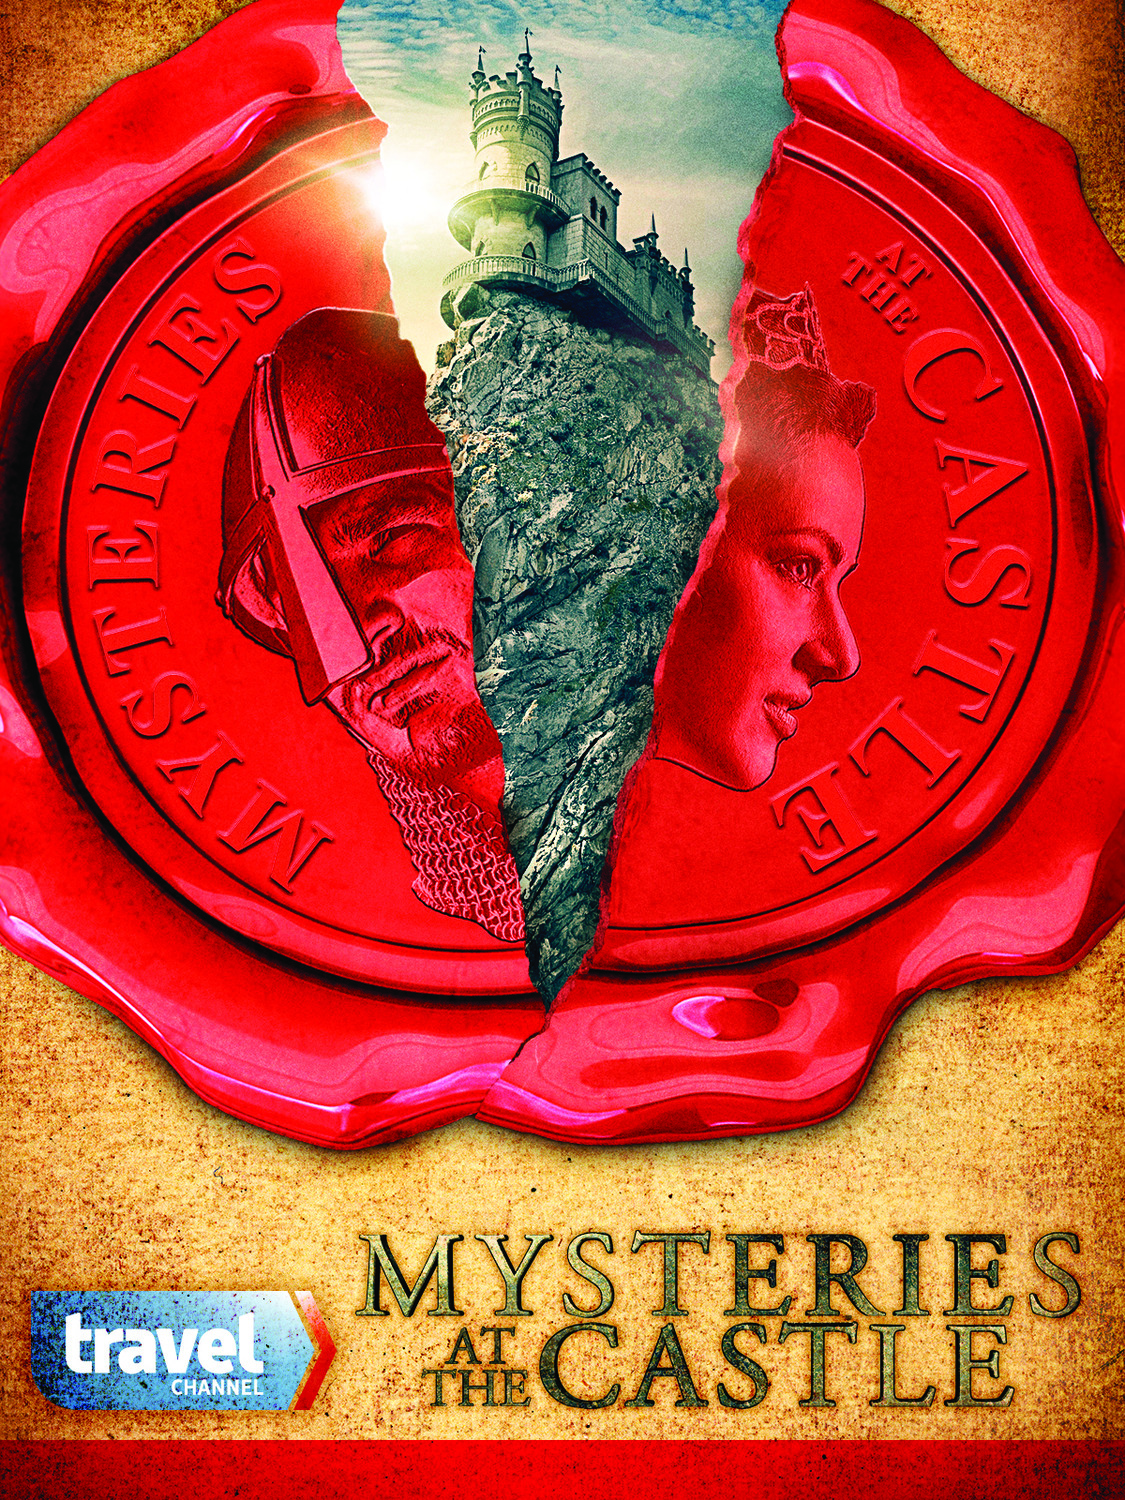 Extra Large TV Poster Image for Mysteries at the Castle 